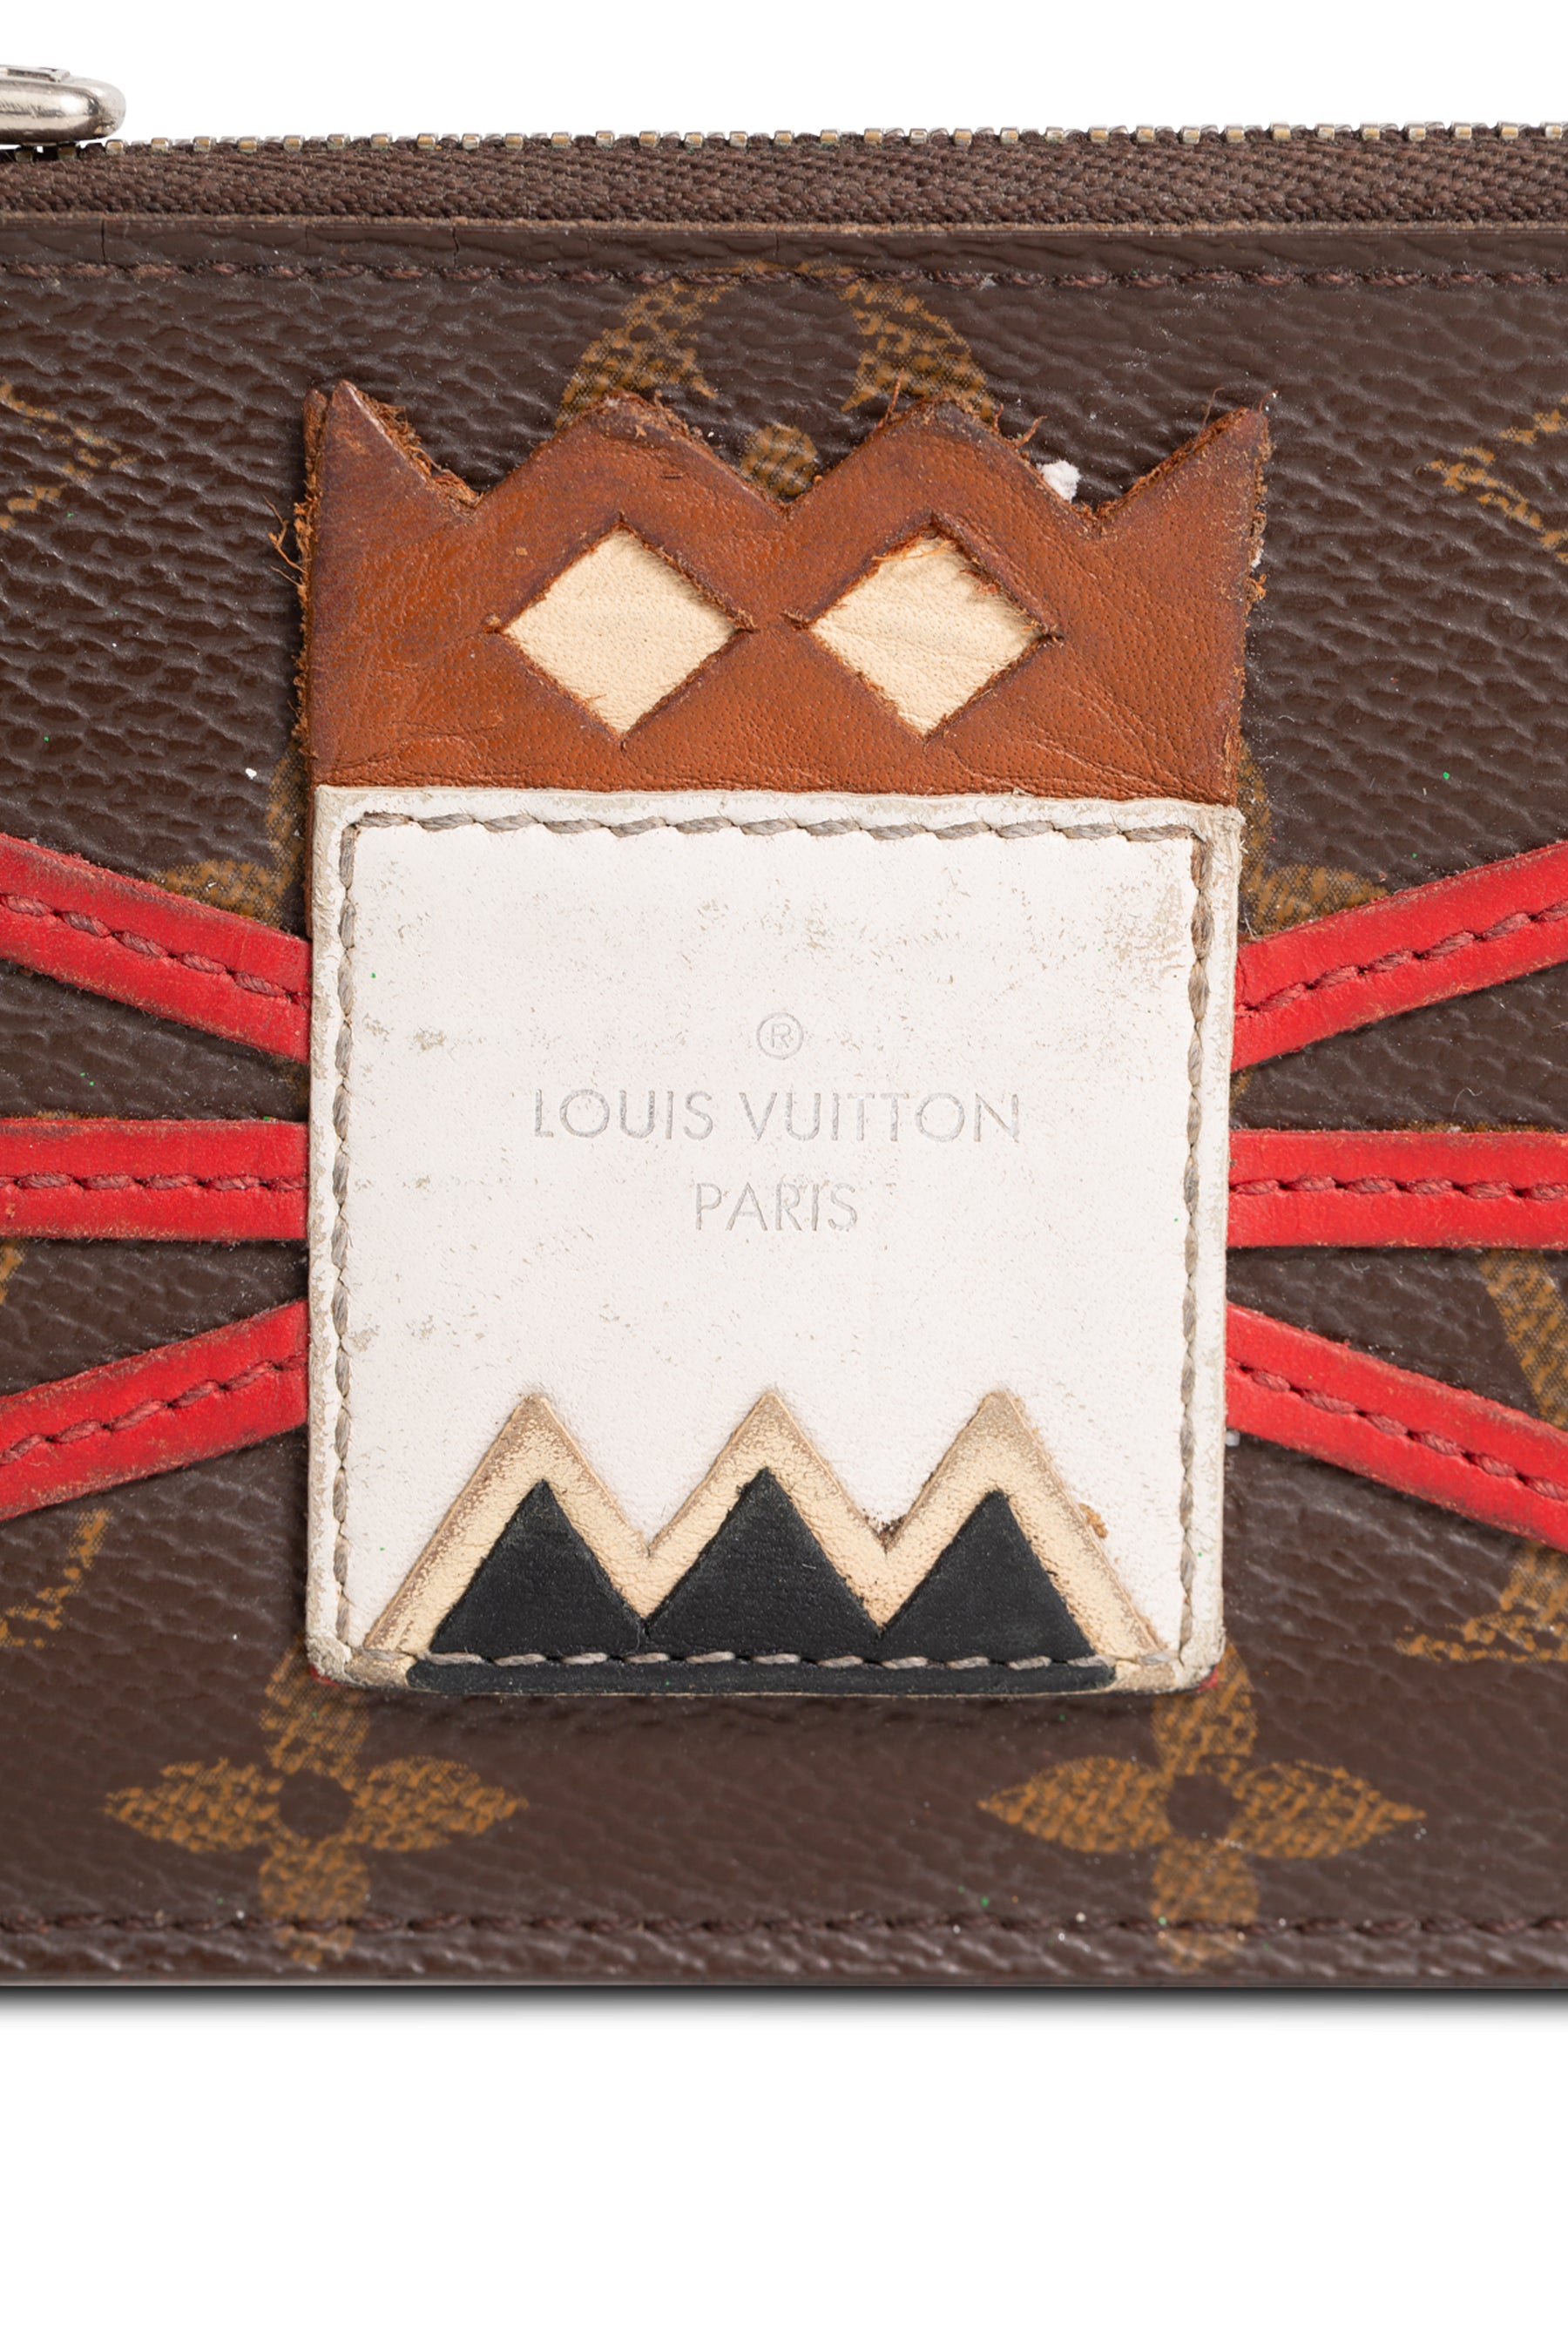 Louis Vuitton Brown Limited Edition Mg Cruise Key Chain Pouch 315 Wallet